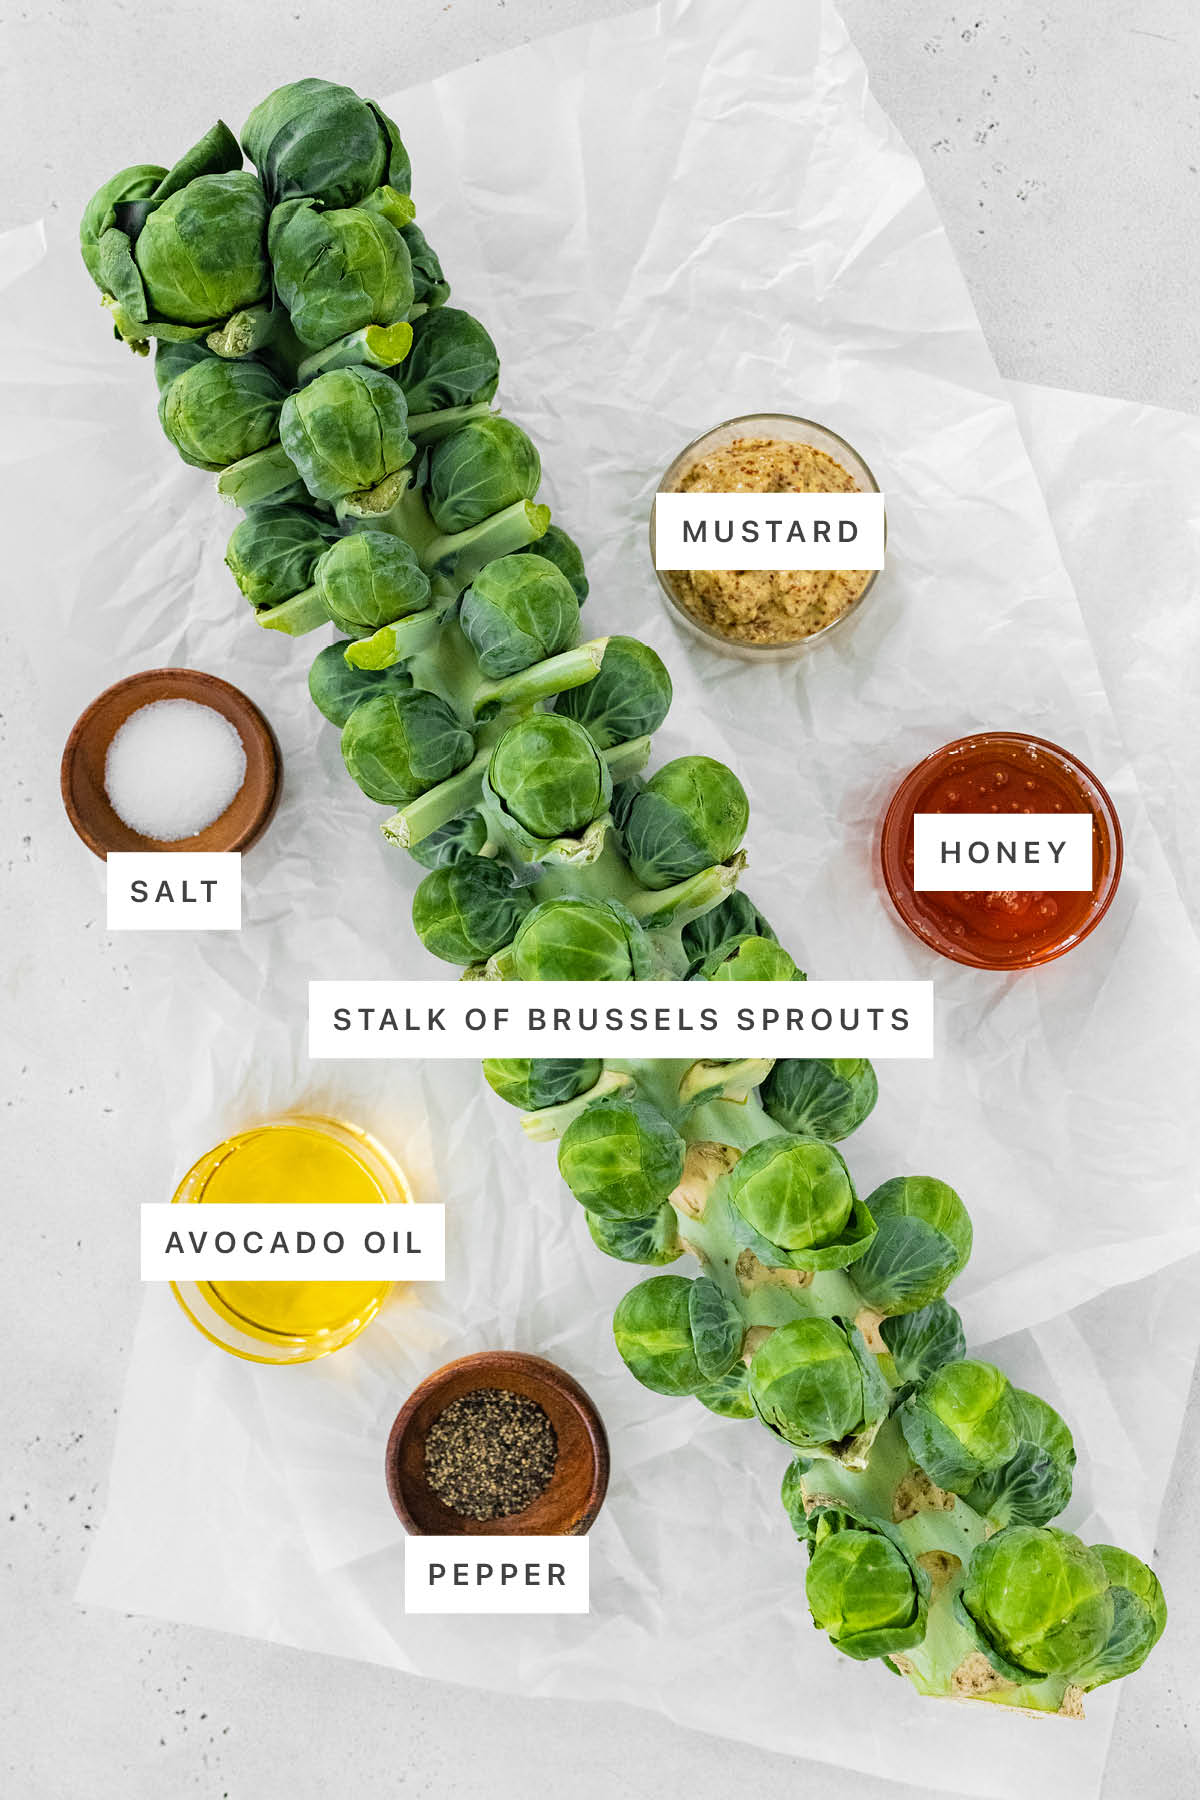 Ingredients measured out to make Brussels Sprouts on the Stalk: mustard, salt, stalk of brussels sprouts, honey, avocado oil and pepper.